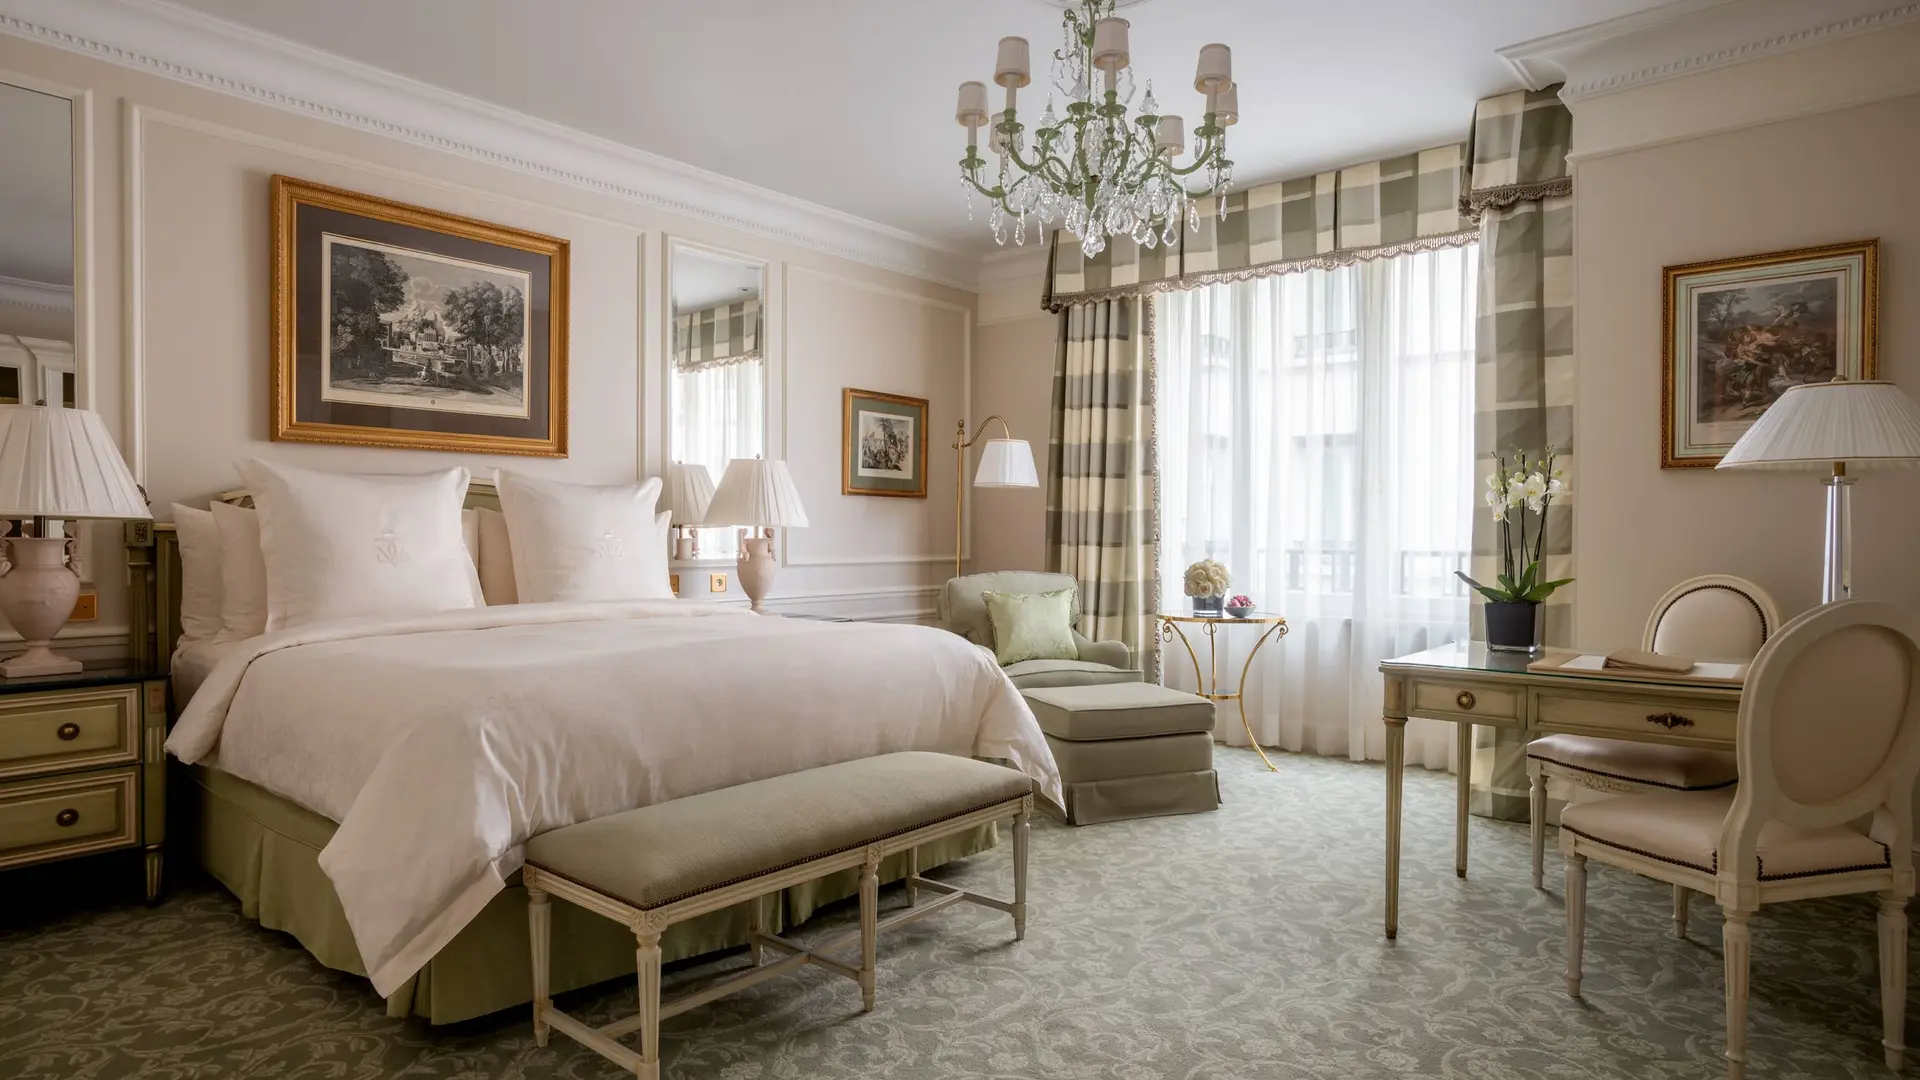 Hotel review Accommodation' - Four Seasons Hotel George V Paris - 0